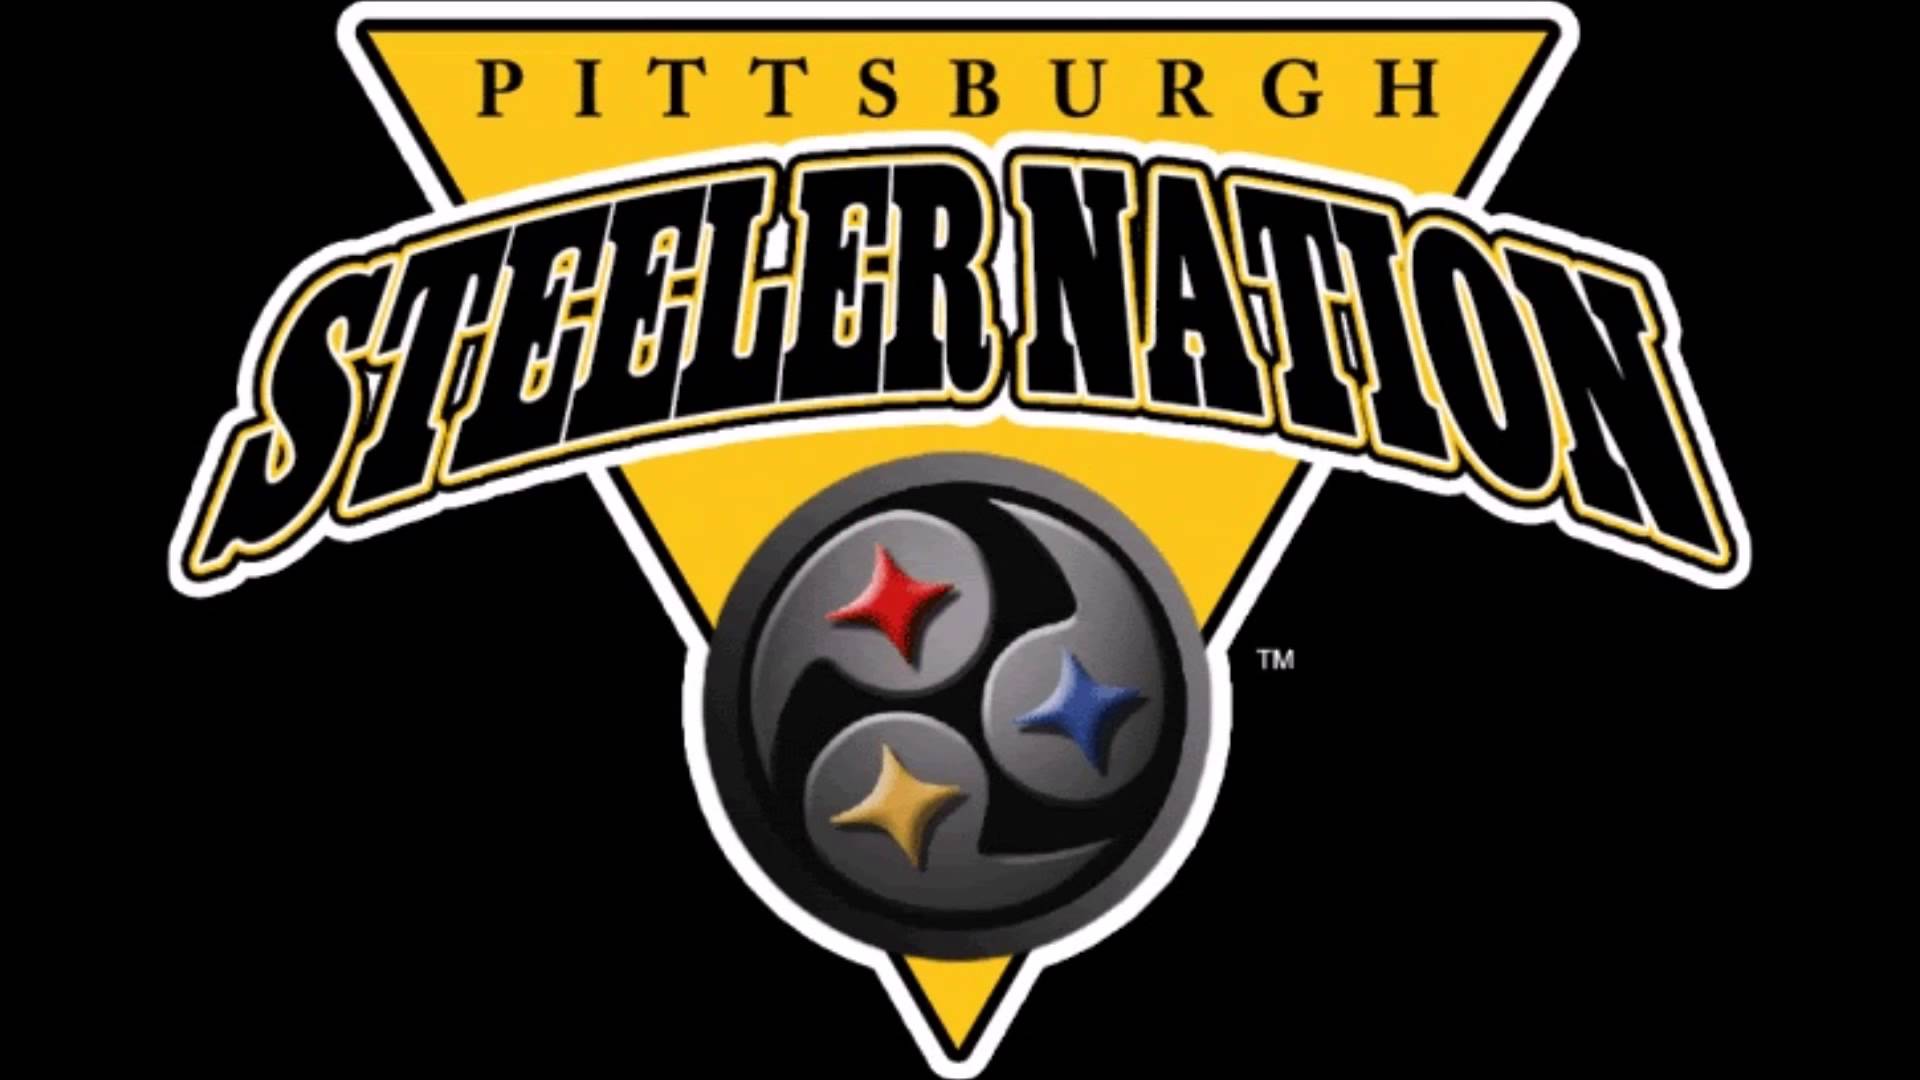 High Resolution Wallpaper | Pittsburgh Steelers 1920x1080 px